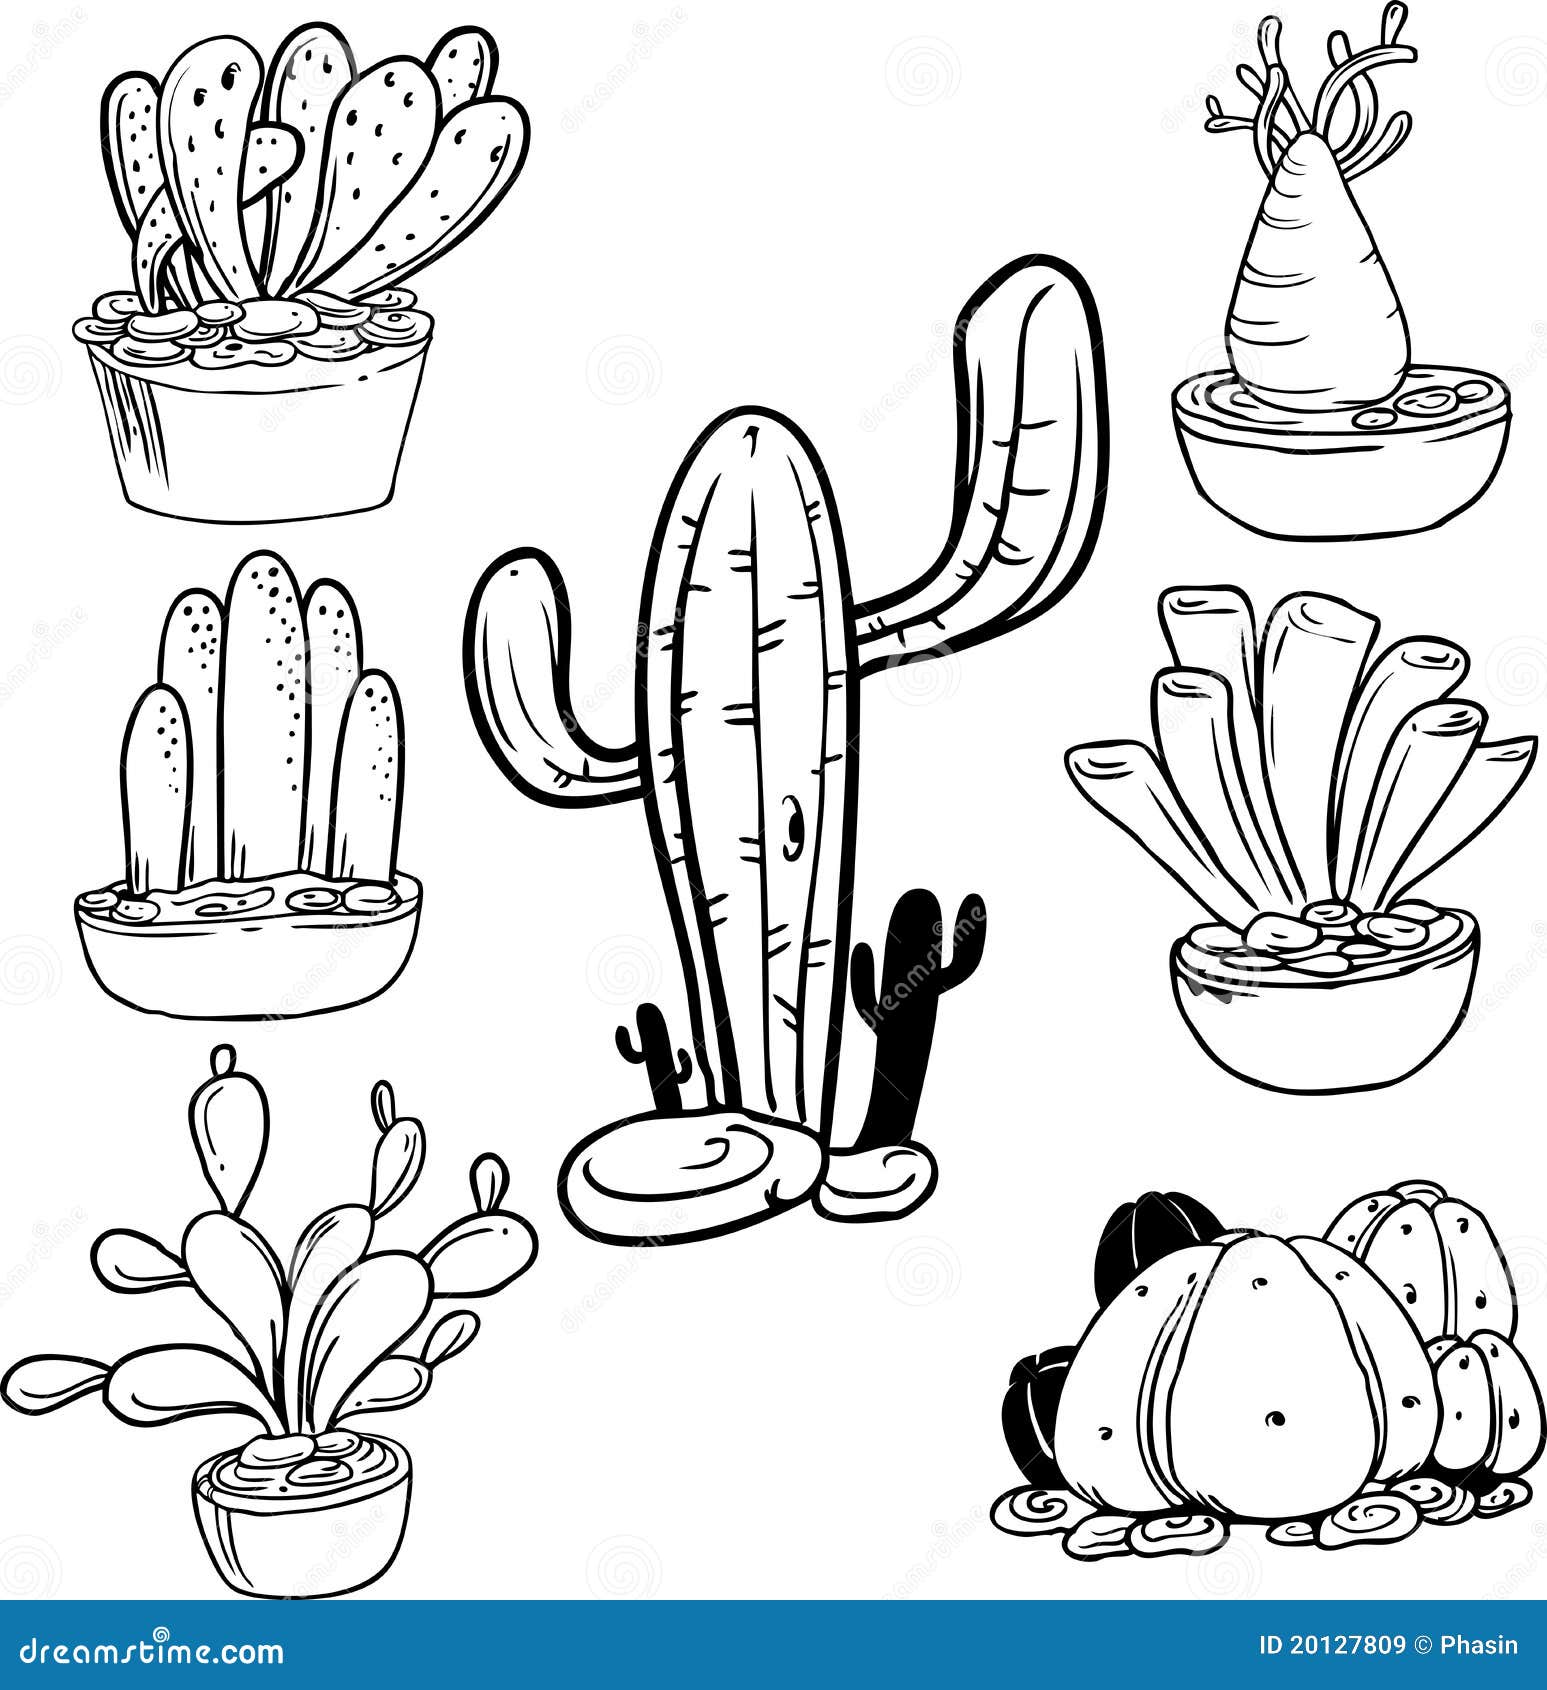 Cactus outline stock vector. Illustration of graphic - 20127809